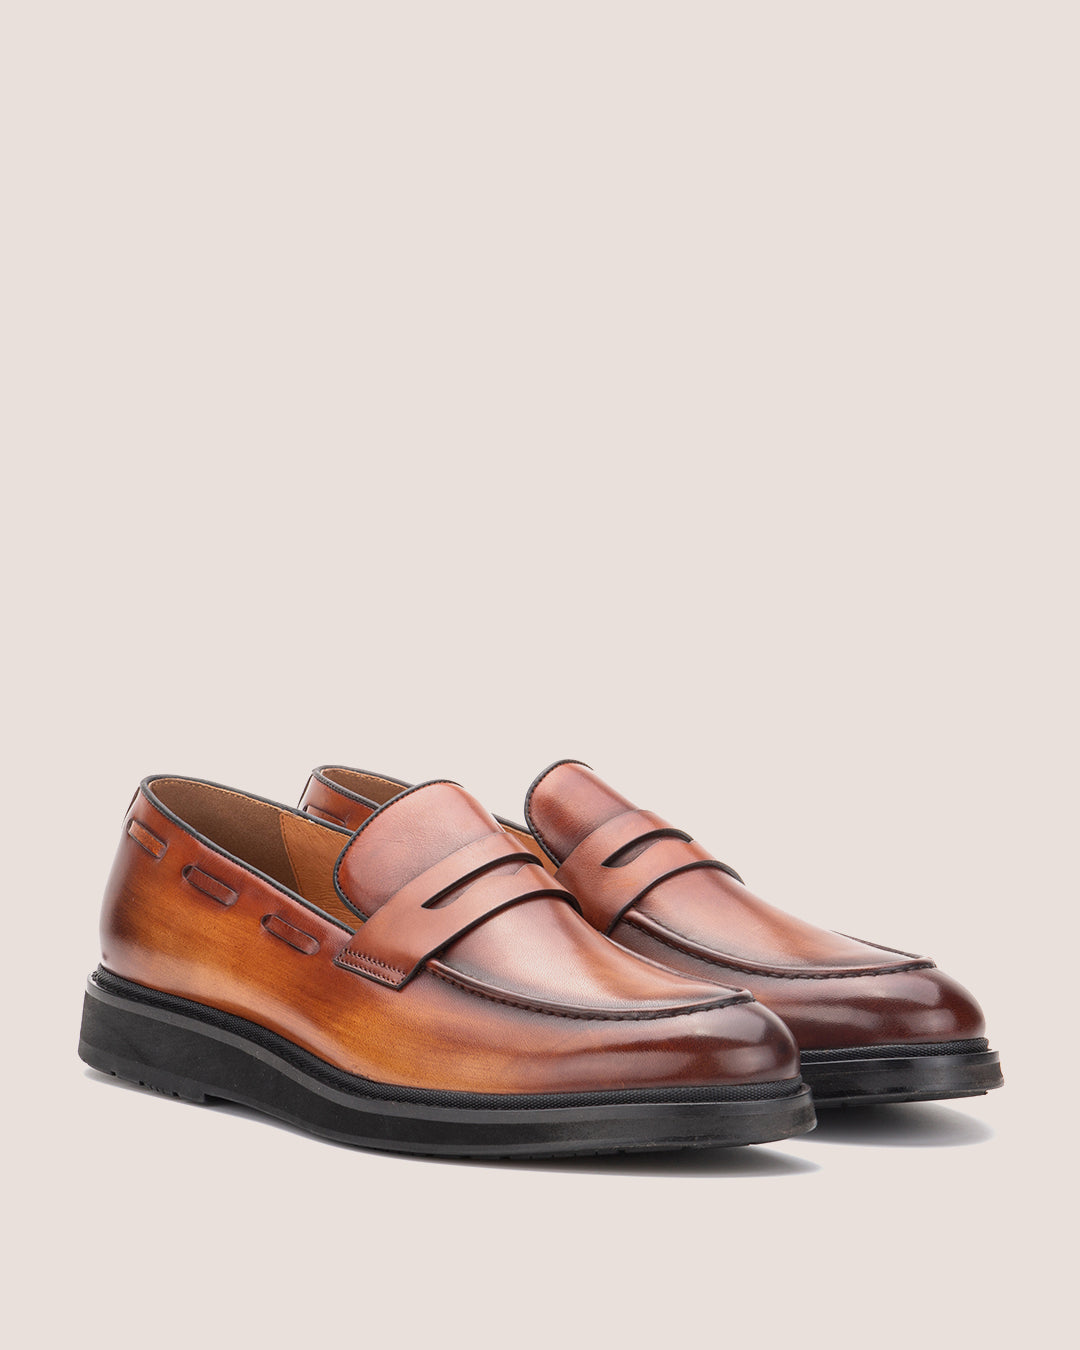 Men's Loafer Shoes – Indigostyle